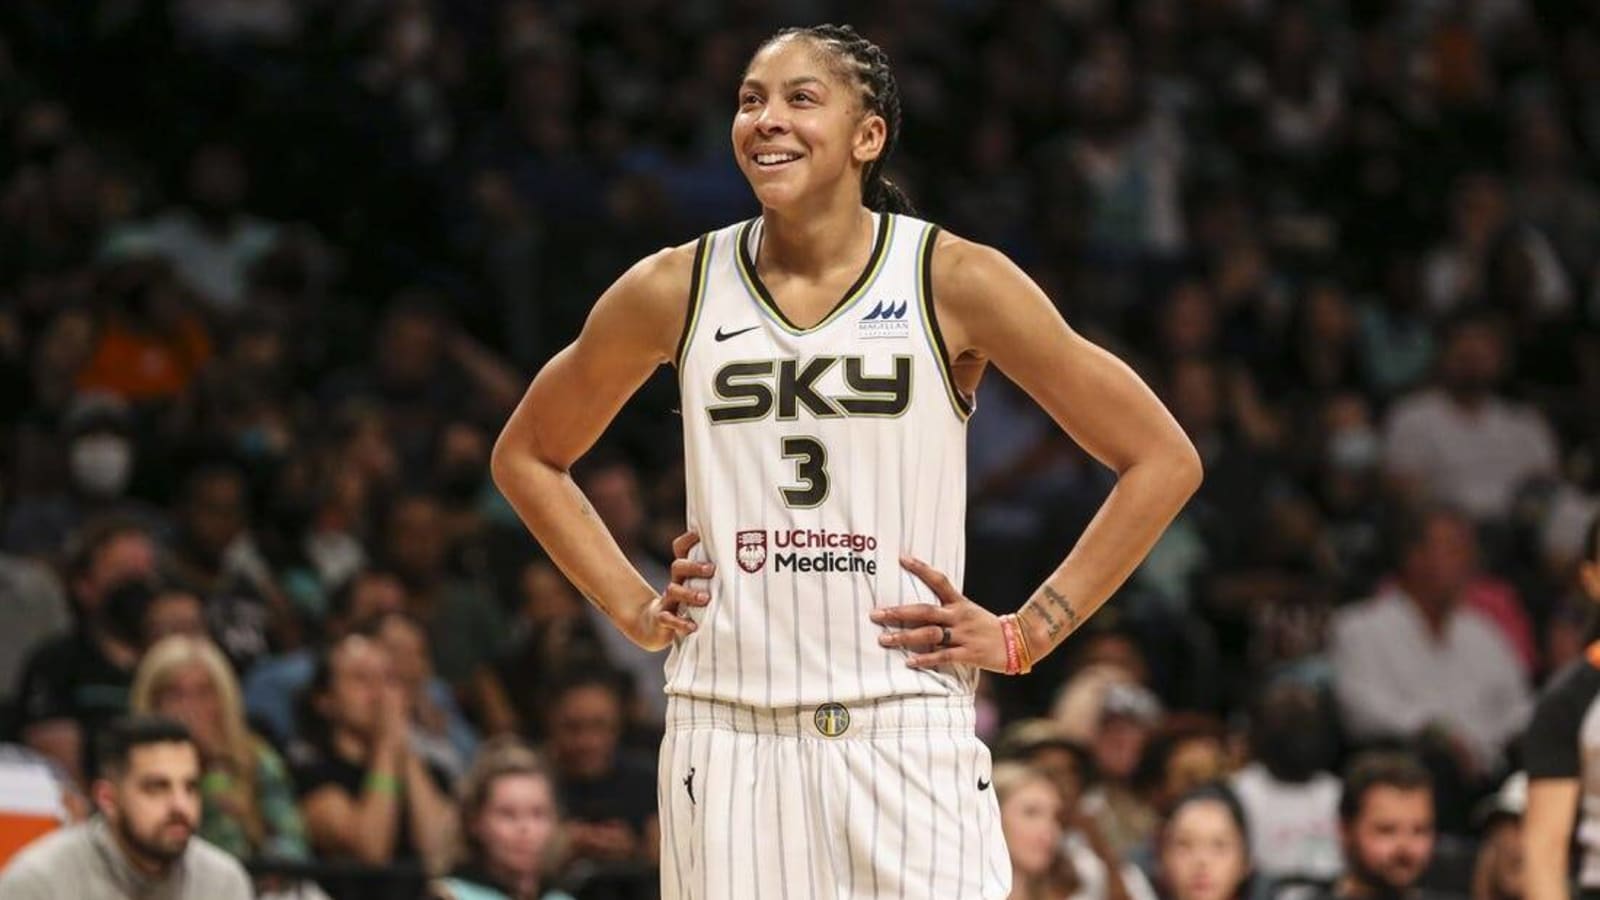 Candace Parker returning to play in 2023